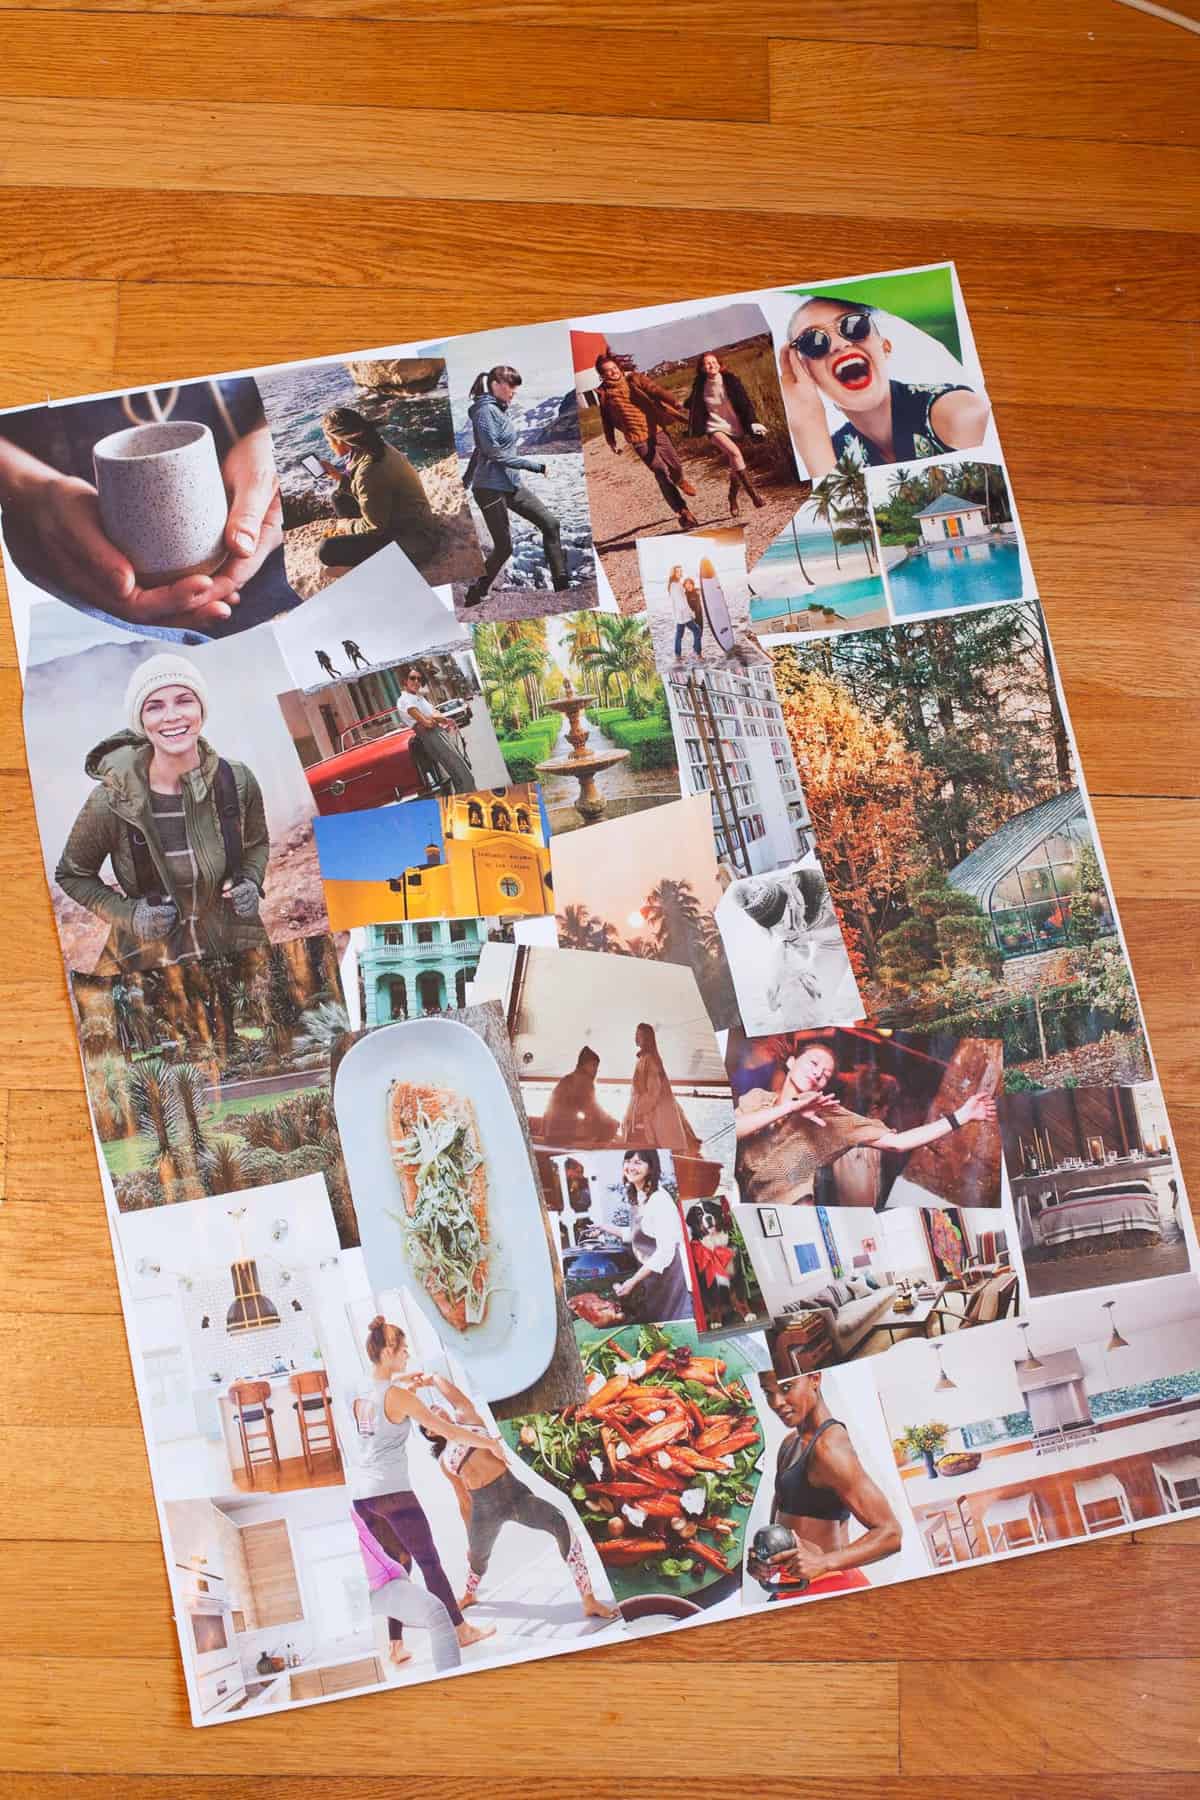  Looking to make New Year's resolutions in a different way this year? Try vision boarding! I'll give the low down here about how to create a vision board and why it's such an enlightening process. 